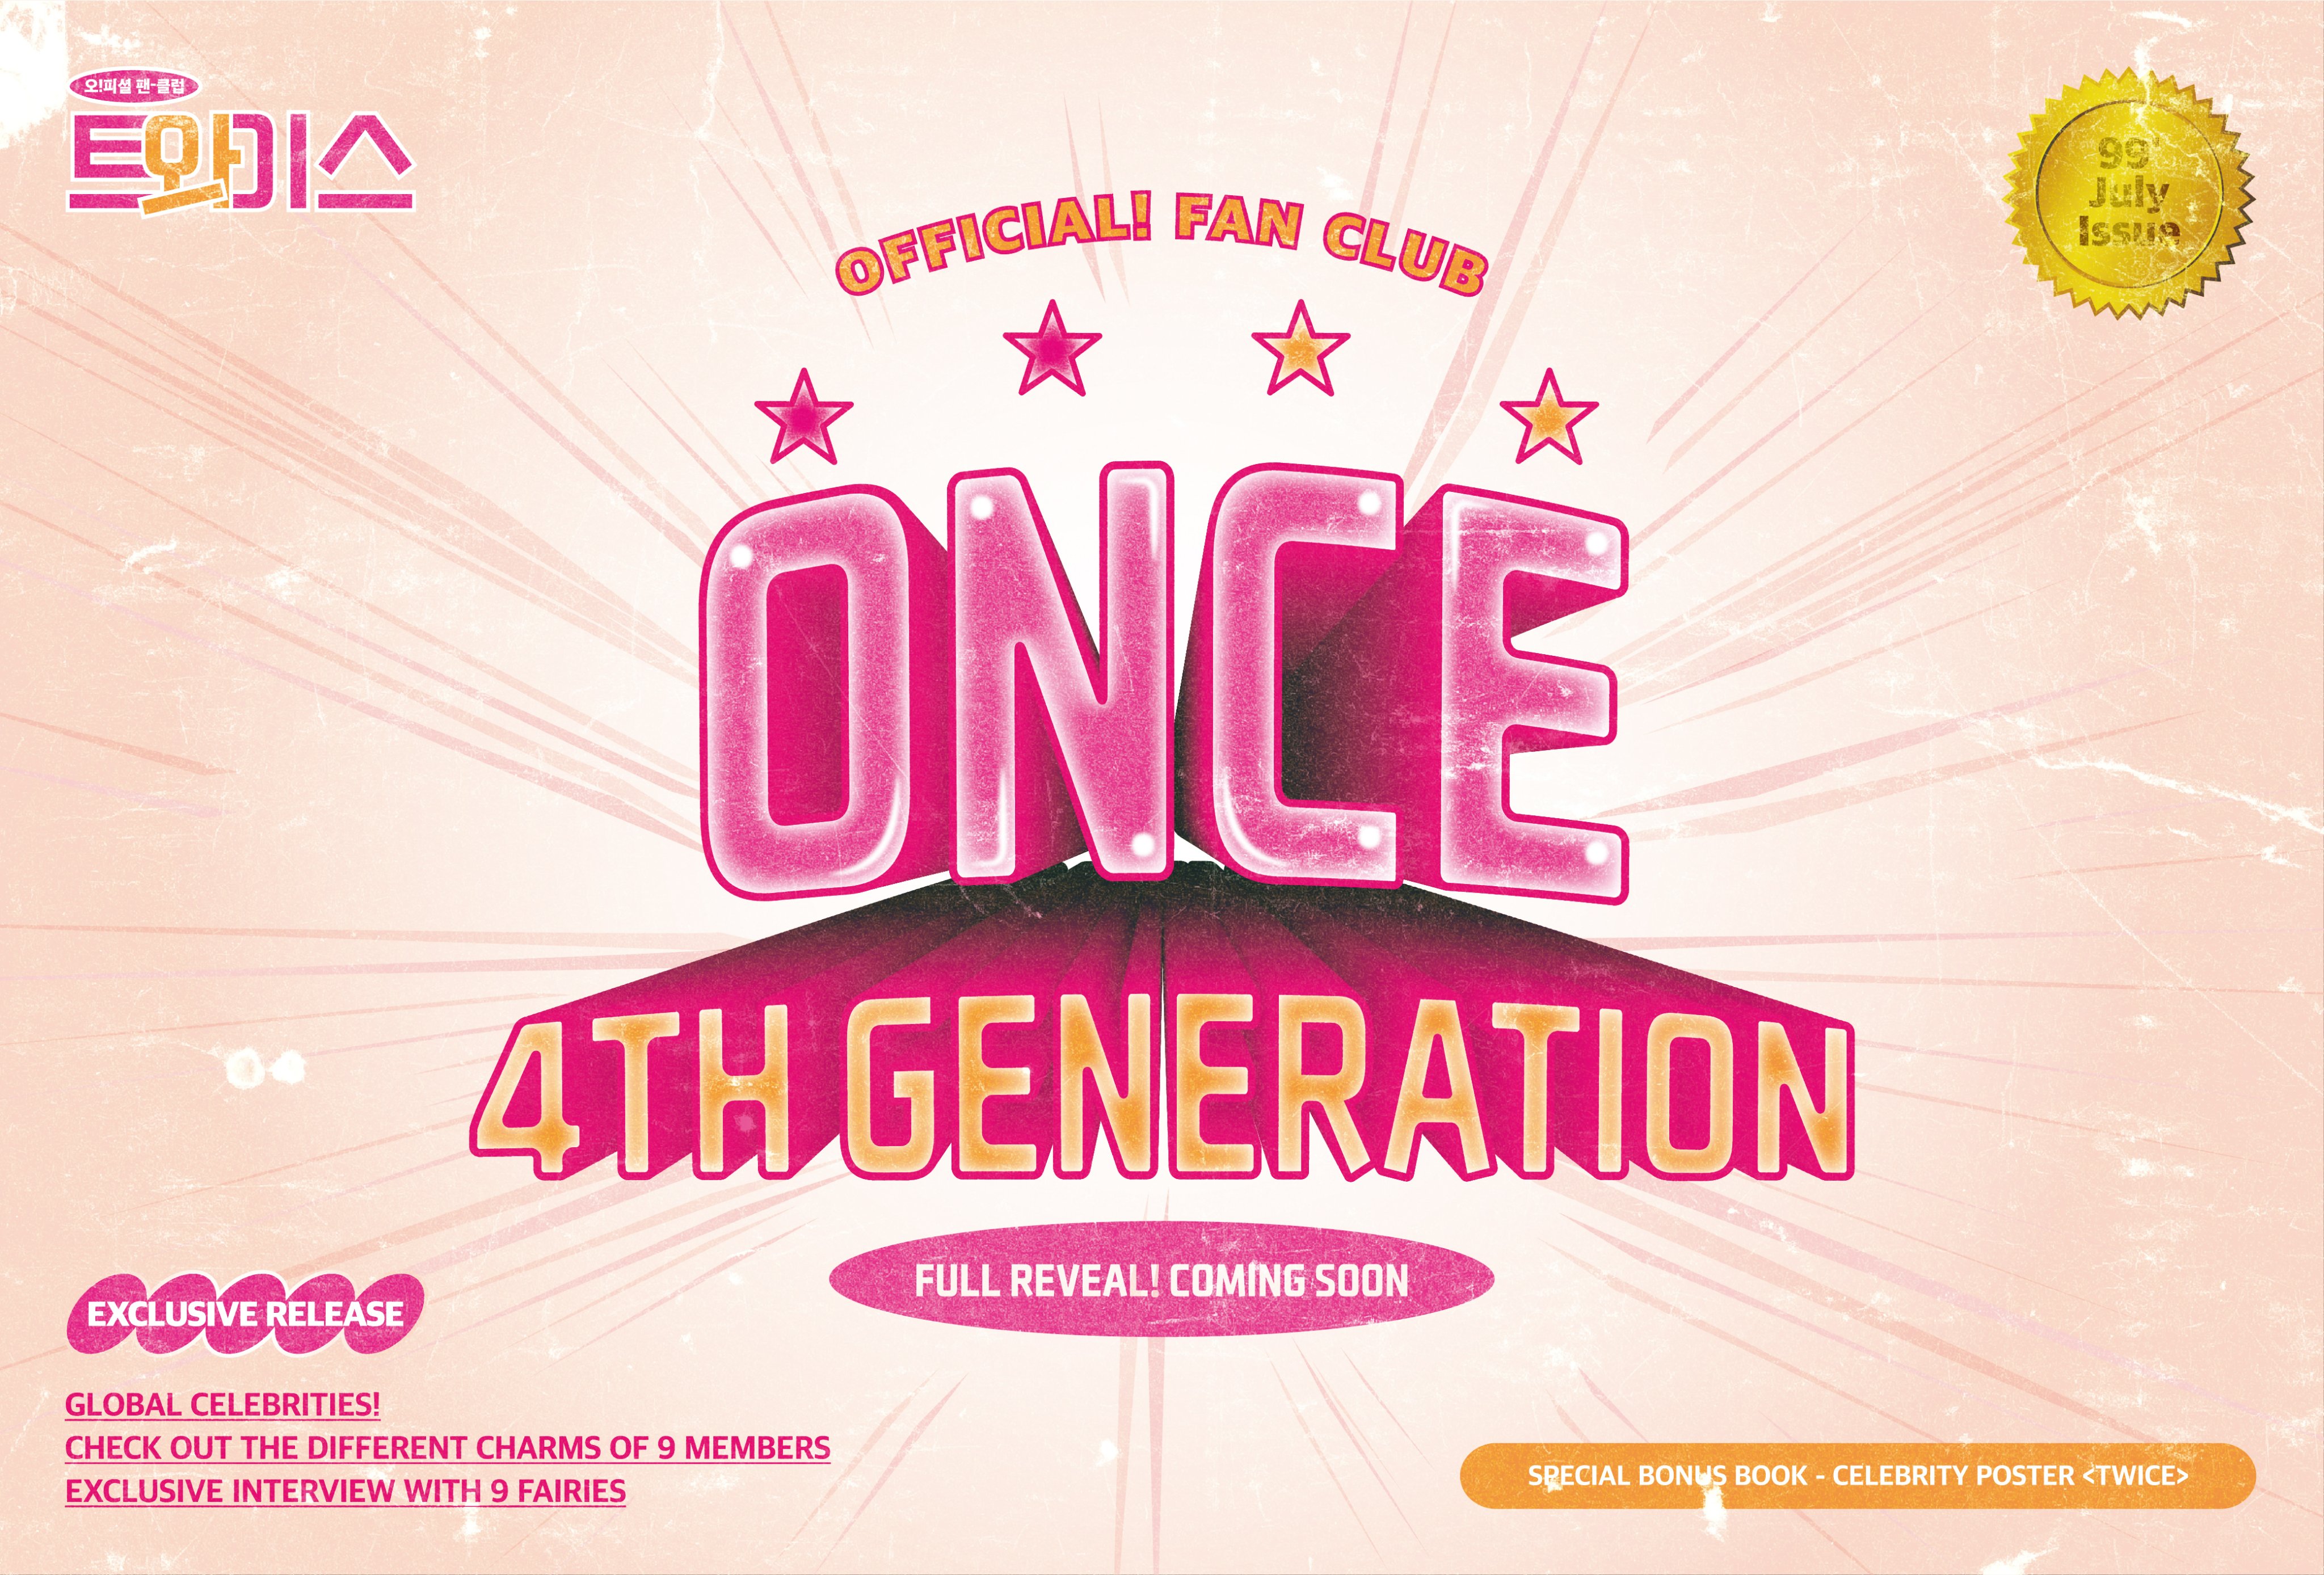 ONCETWICE JAPAN OFFICIAL FANCLUB level 4